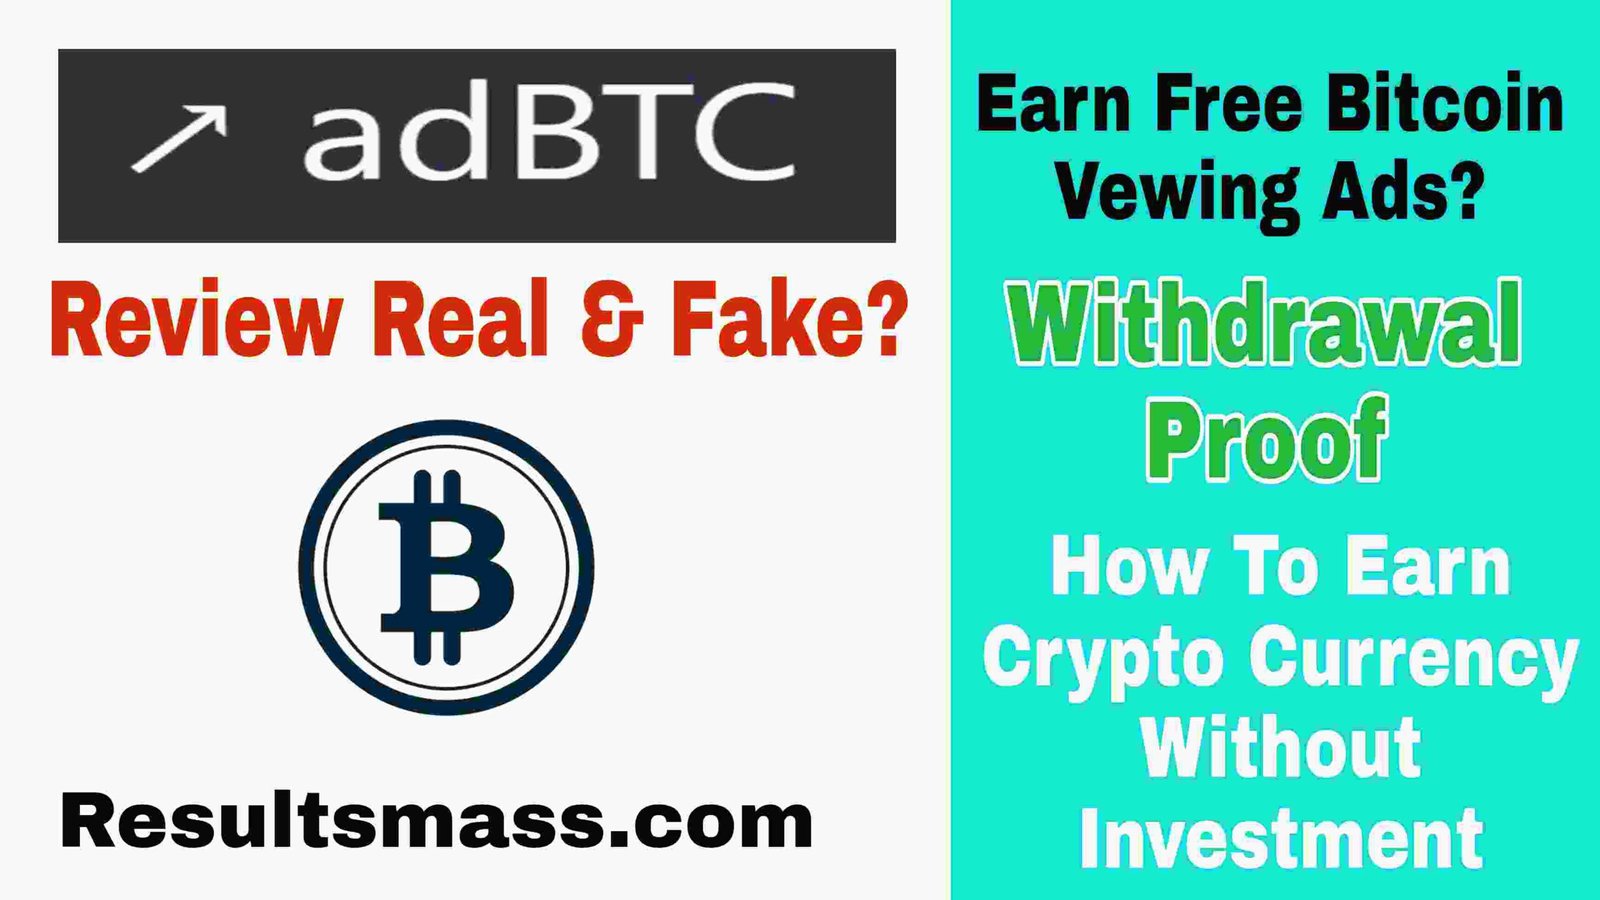 Adbtc Free Earning Site Earn bitcoins by viewing advertisements from home.